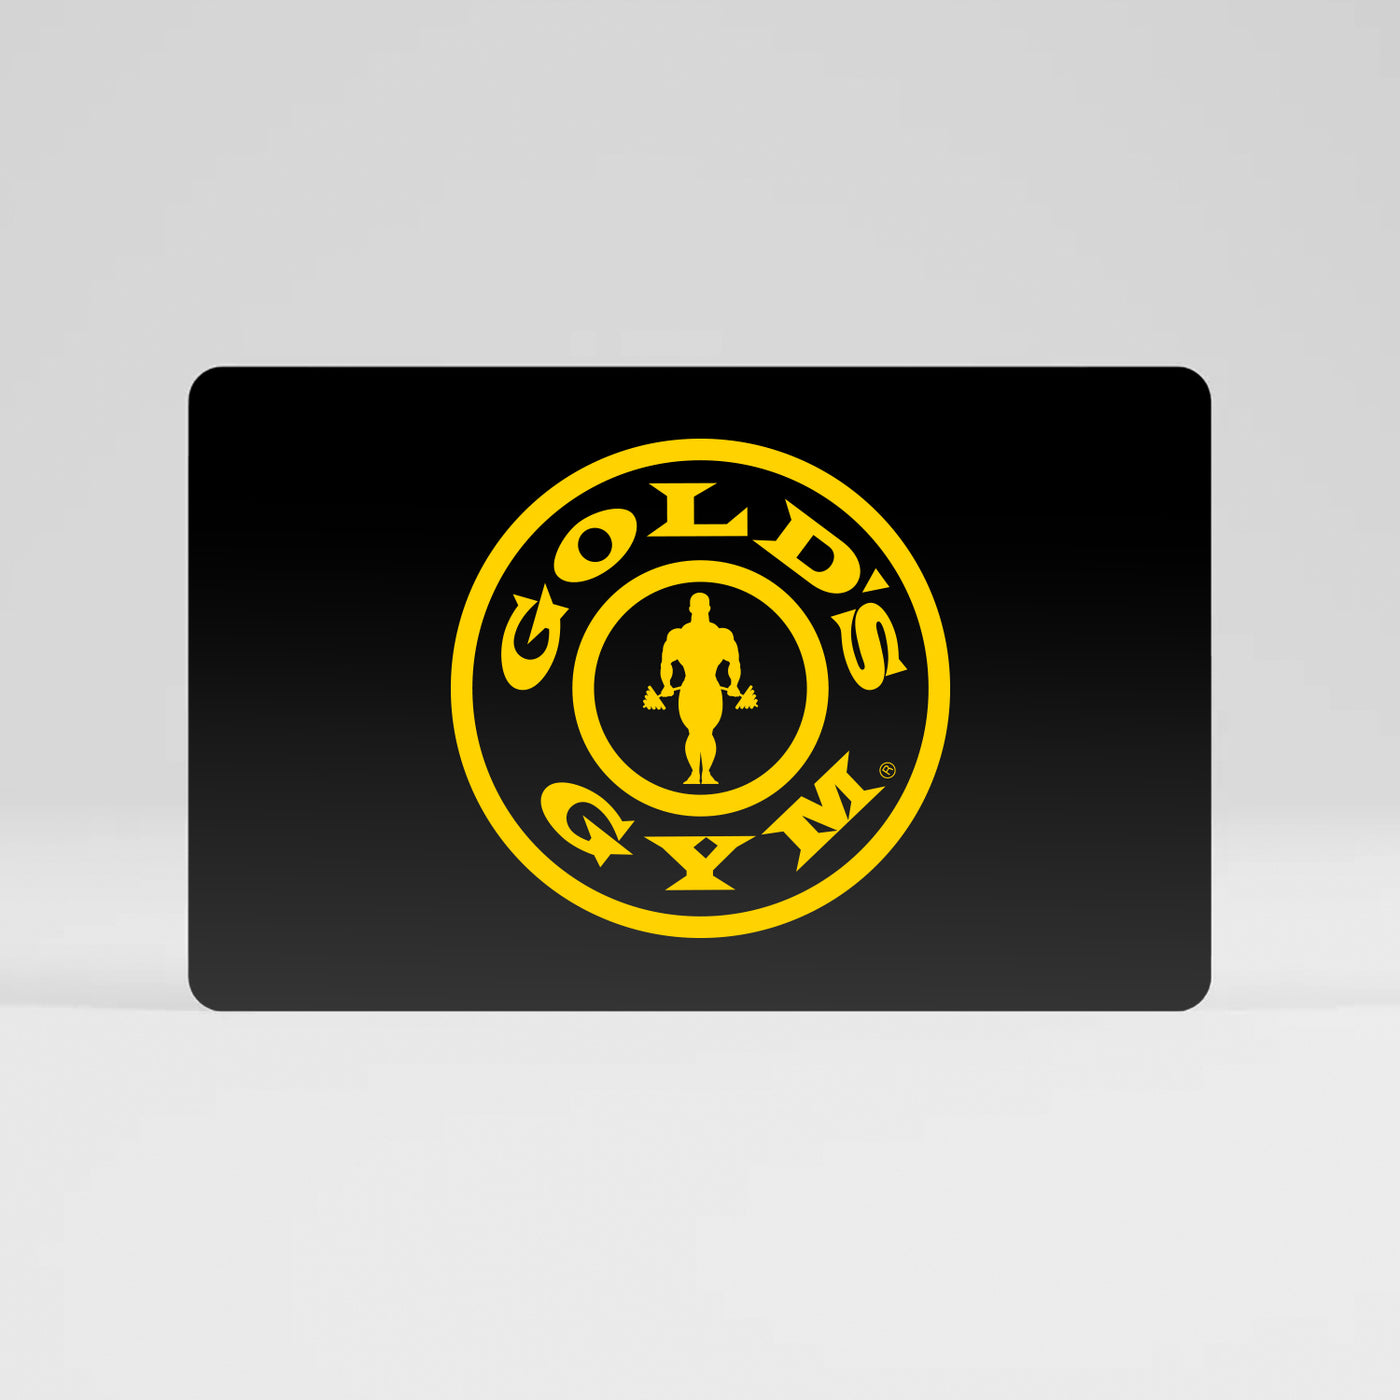 Black Golds Gym giftcard with yellow Gold's Gym logo